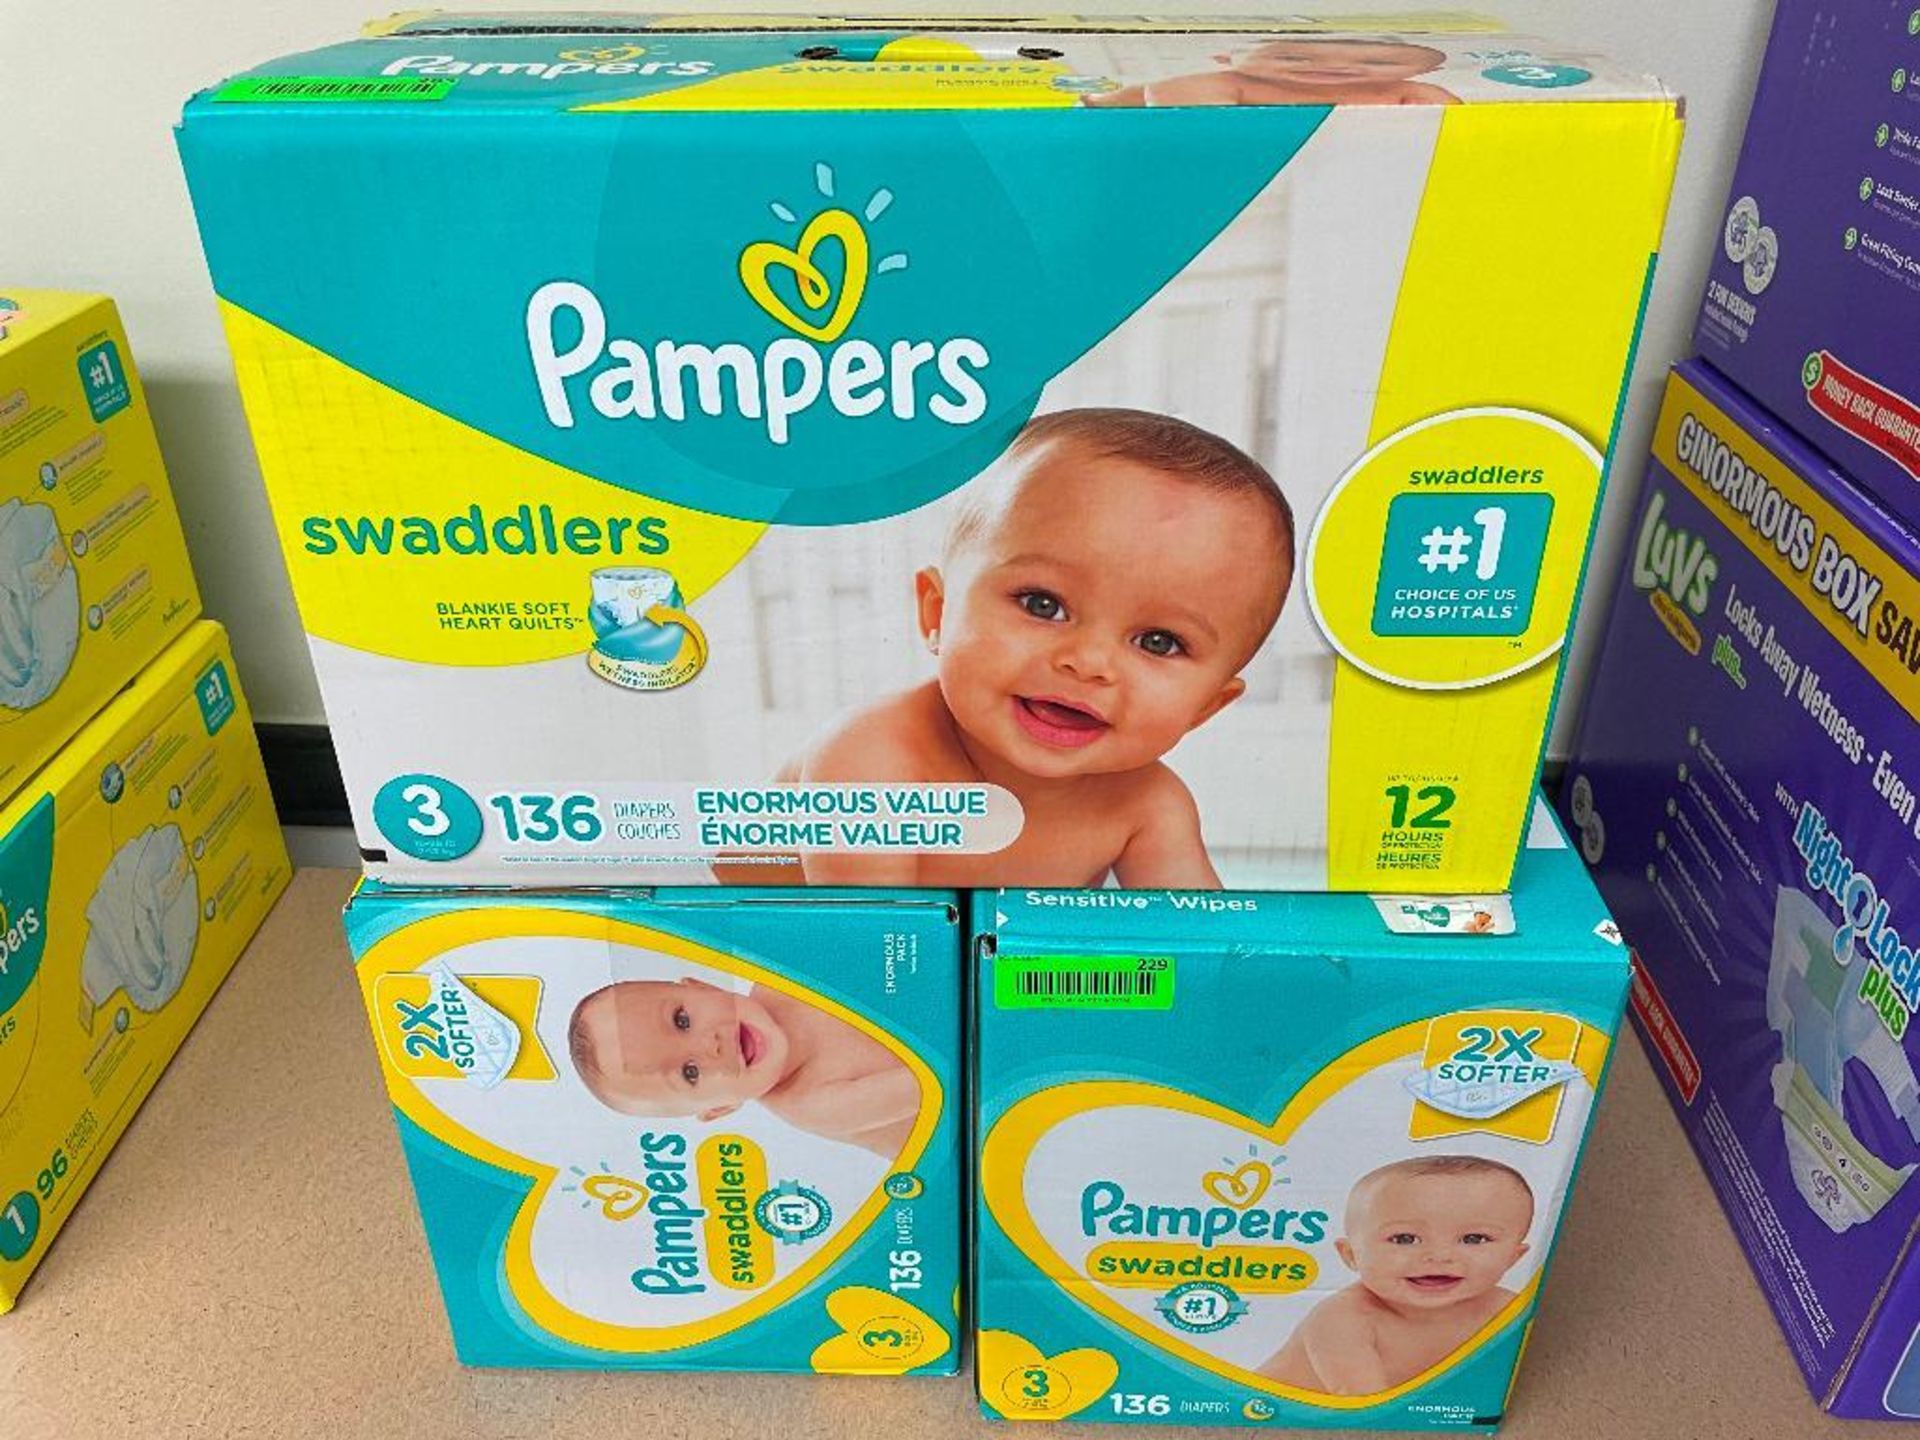 DESCRIPTION: (3) BOXES OF PAMPERS SWADDLERS SIZE 3 LOCATION: BASEMENT CONFERENCE ROOM QTY: 3